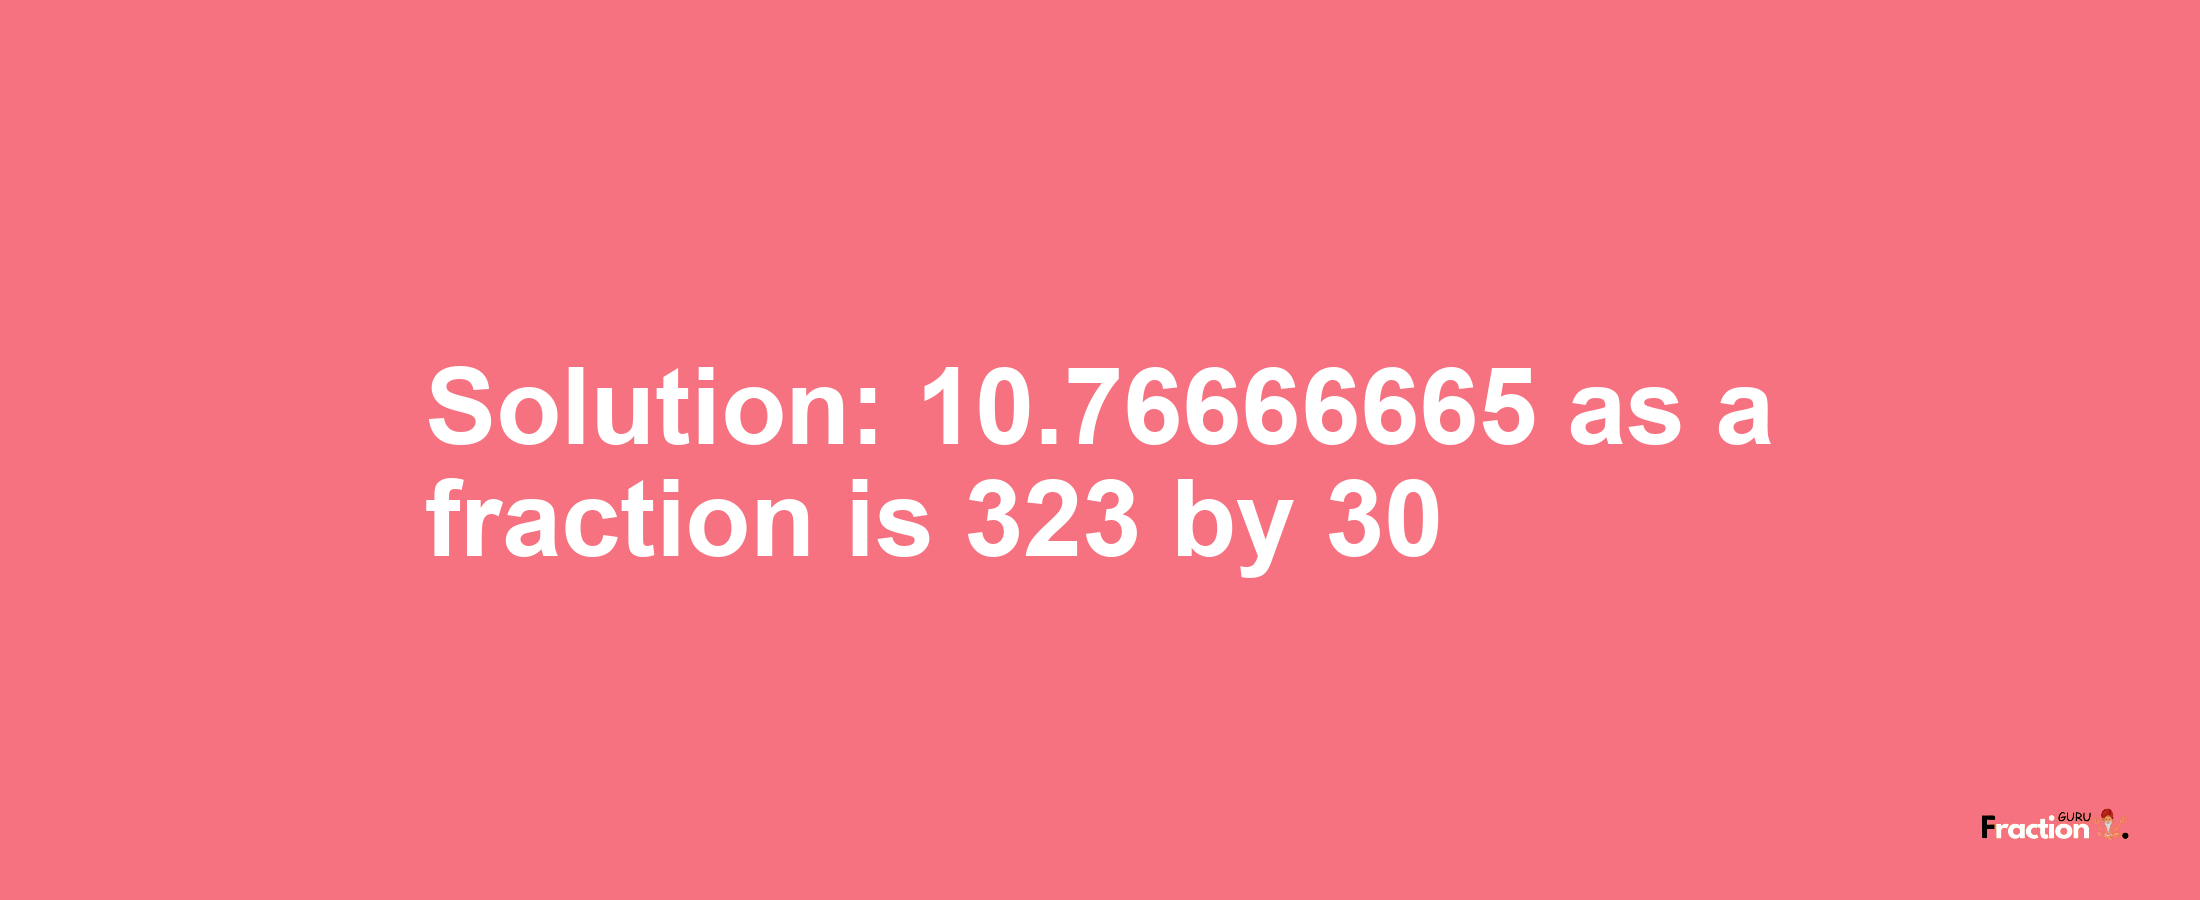 Solution:10.76666665 as a fraction is 323/30